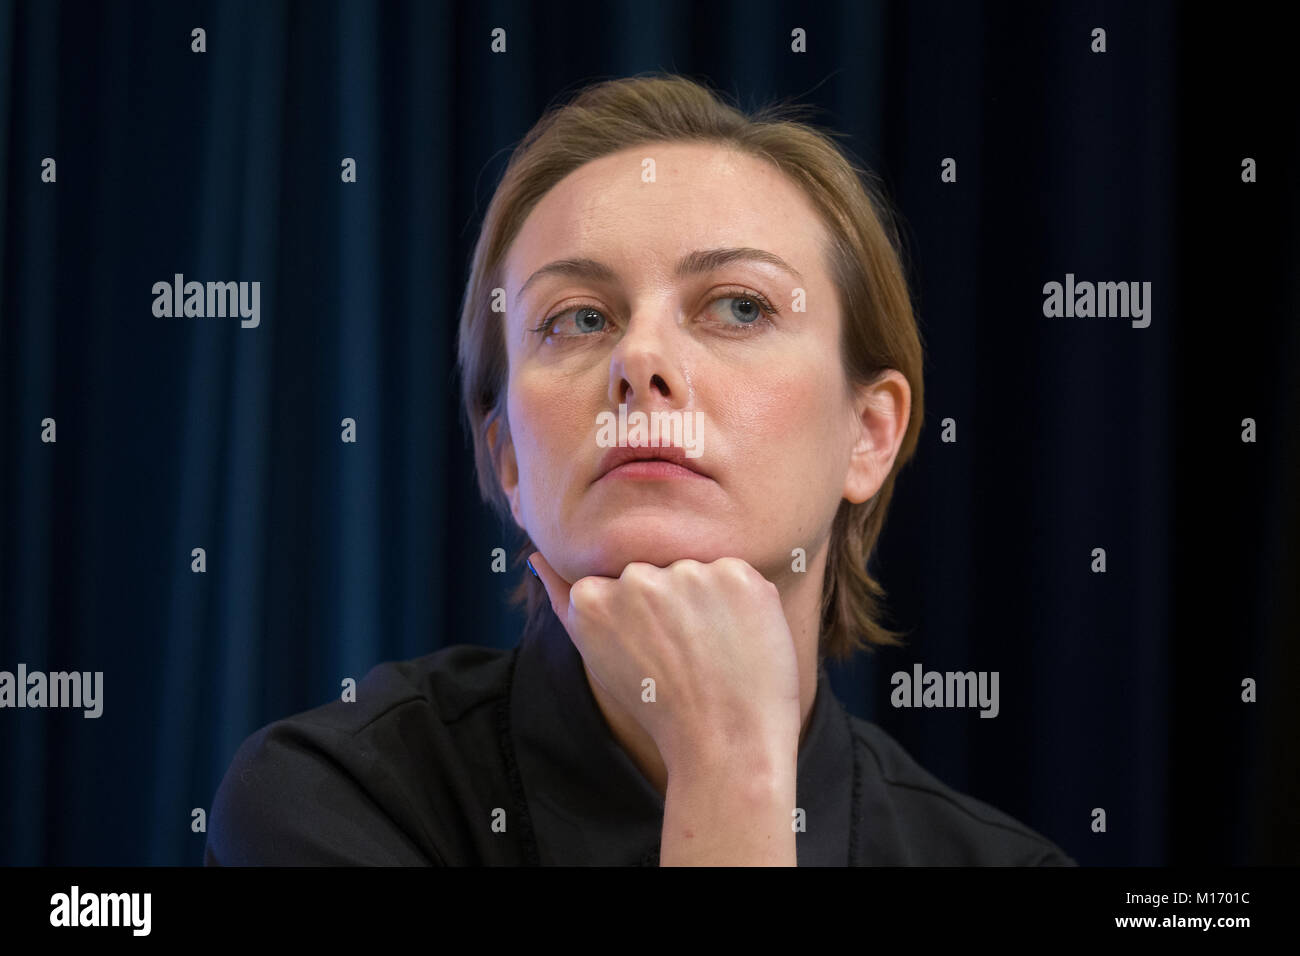 Moscow, Russia. 25th January, 2018. Actress Severia Janusauskaite at a news conference ahead of the press-preview of the Selfie film at the Rossiya Segodnya news agency's international multimedia press center. Credit: Victor Vytolskiy/Alamy Live News Stock Photo